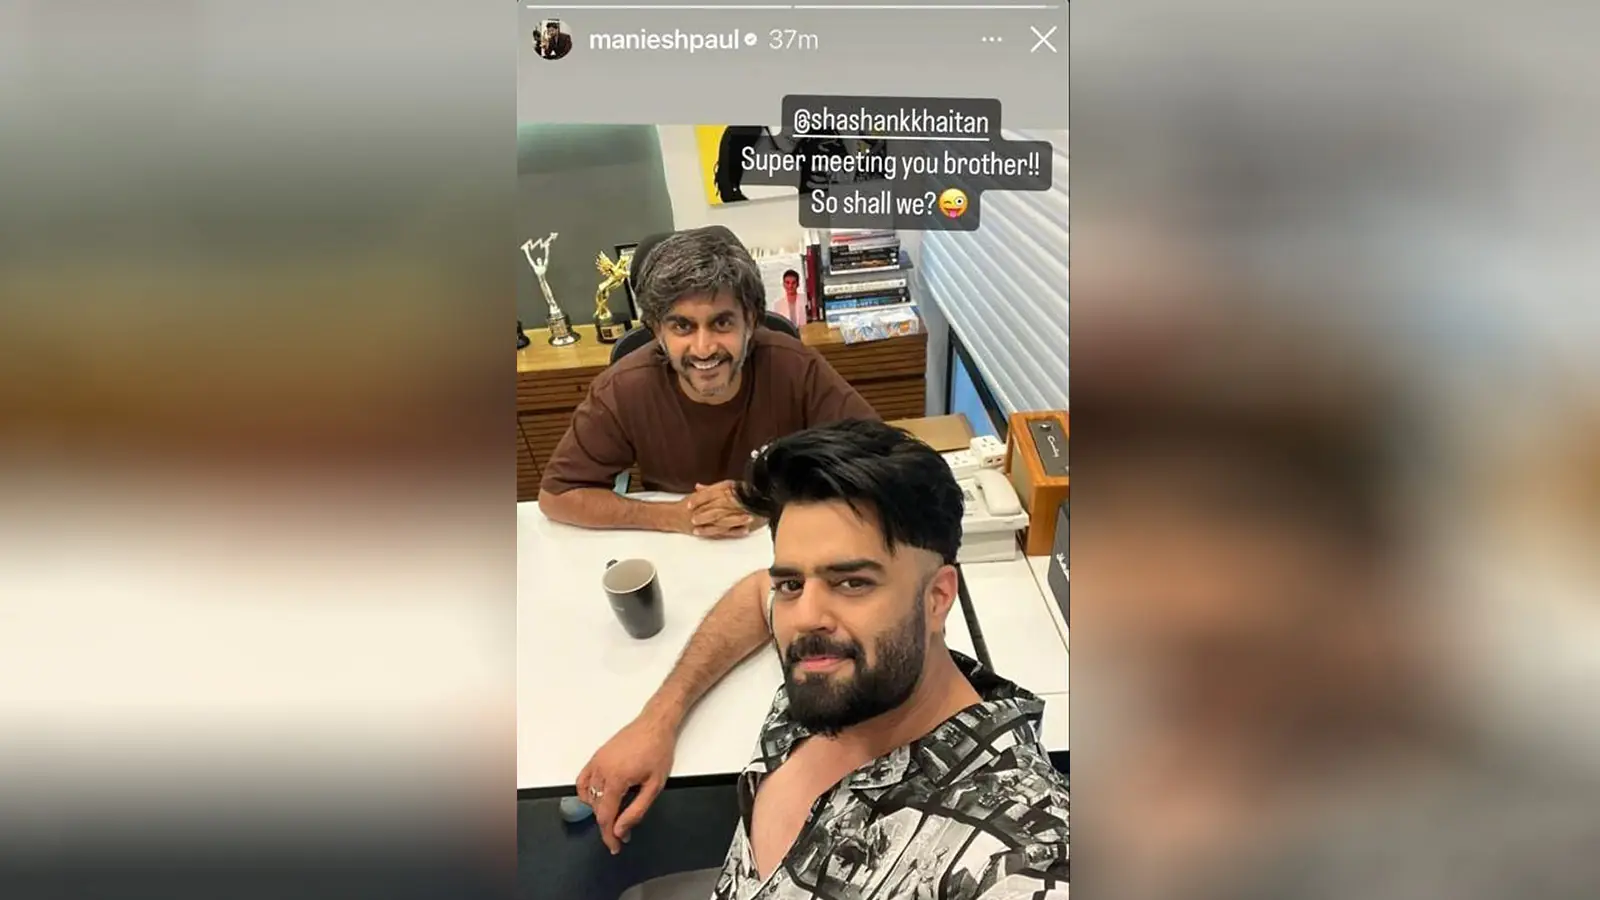 Maniesh Paul and Shashank Khaitan Fuel Excitement with a Selfie, Hinting at a Potential Bollywood Collaboration